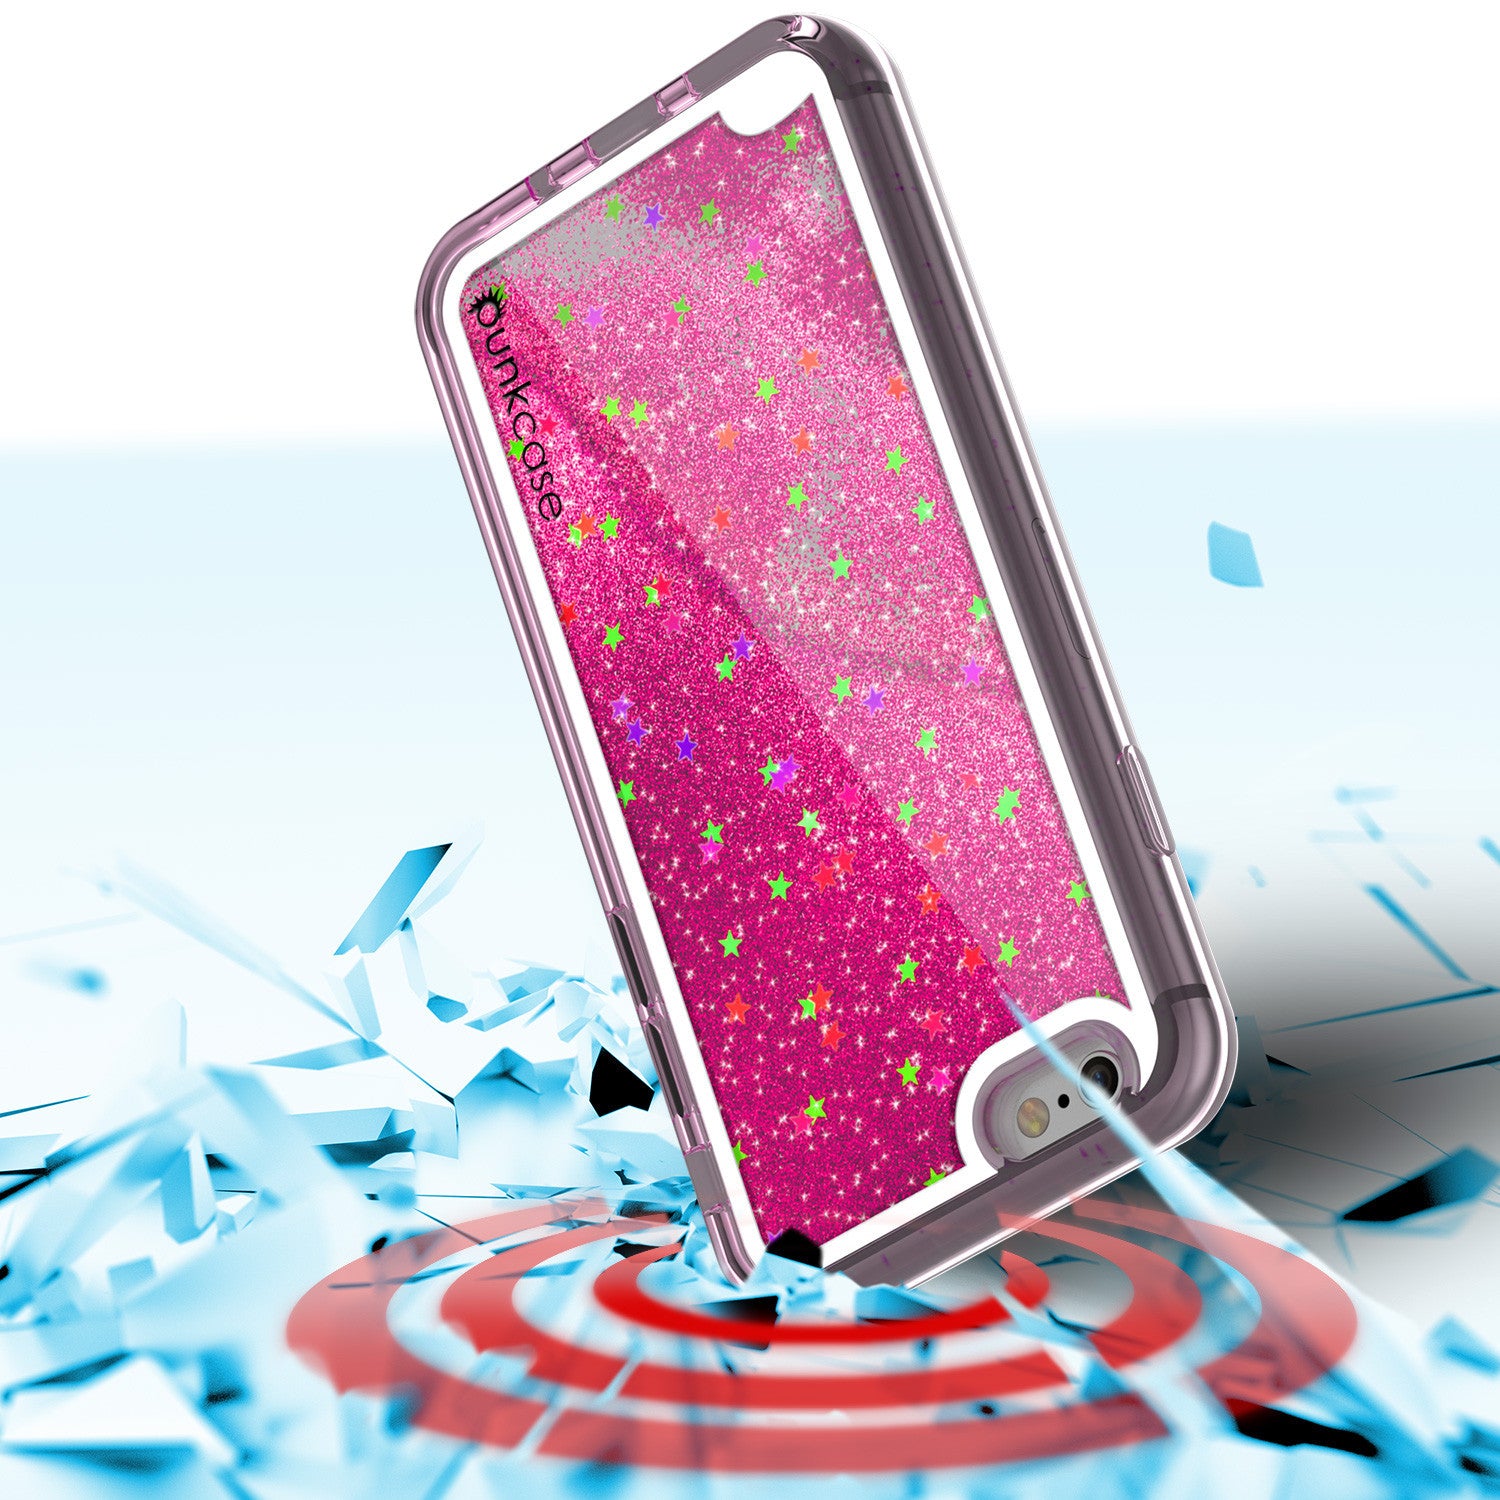 iPhone 7 Case, PunkCase LIQUID Pink Series, Protective Dual Layer Floating Glitter Cover